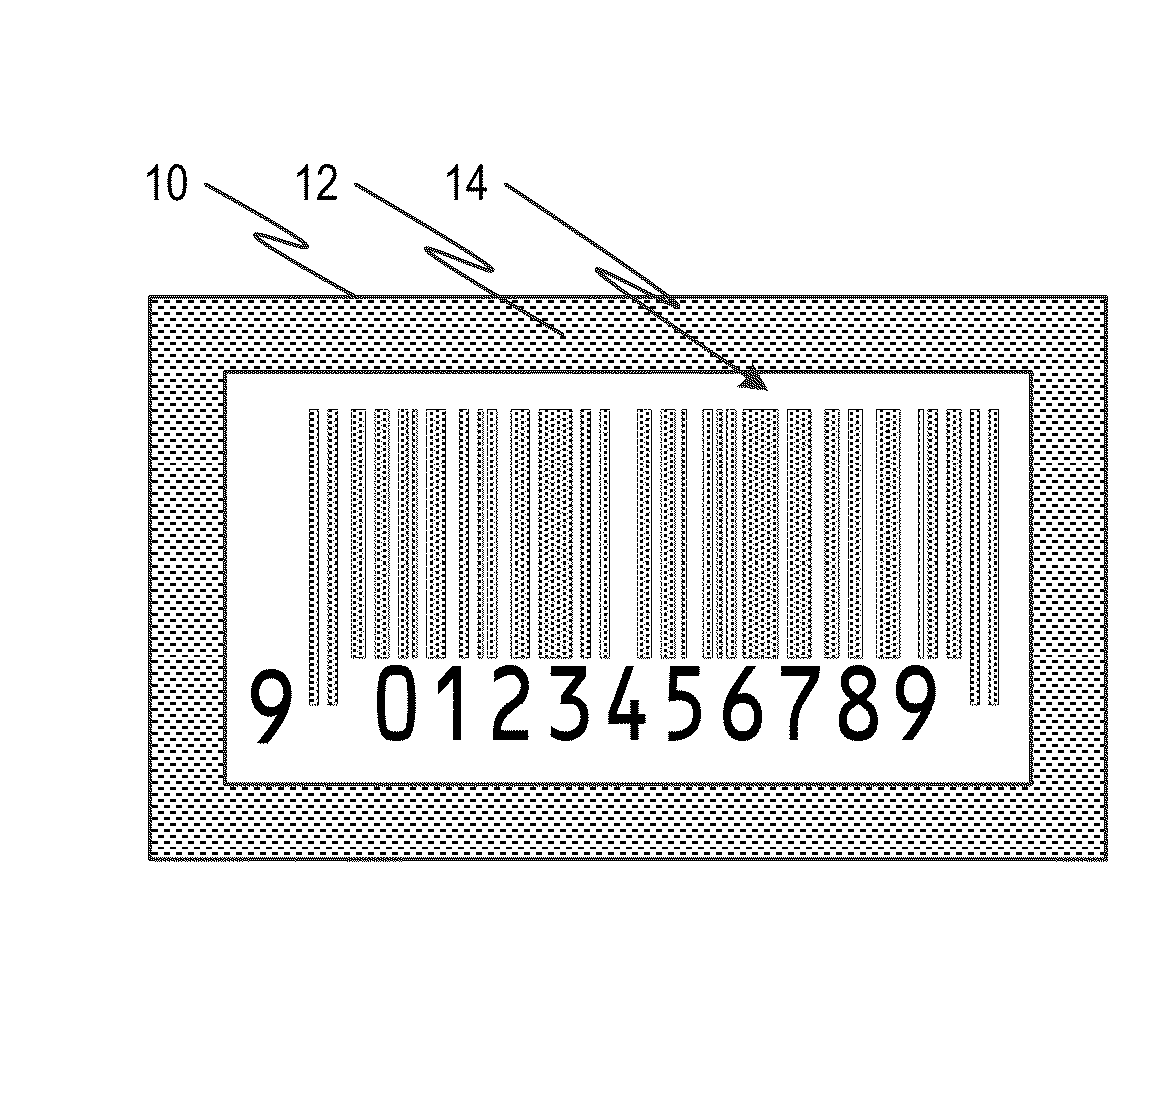 Method and Apparatus for Communicating Information Via a Display Screen Using Light-Simulated Bar Codes